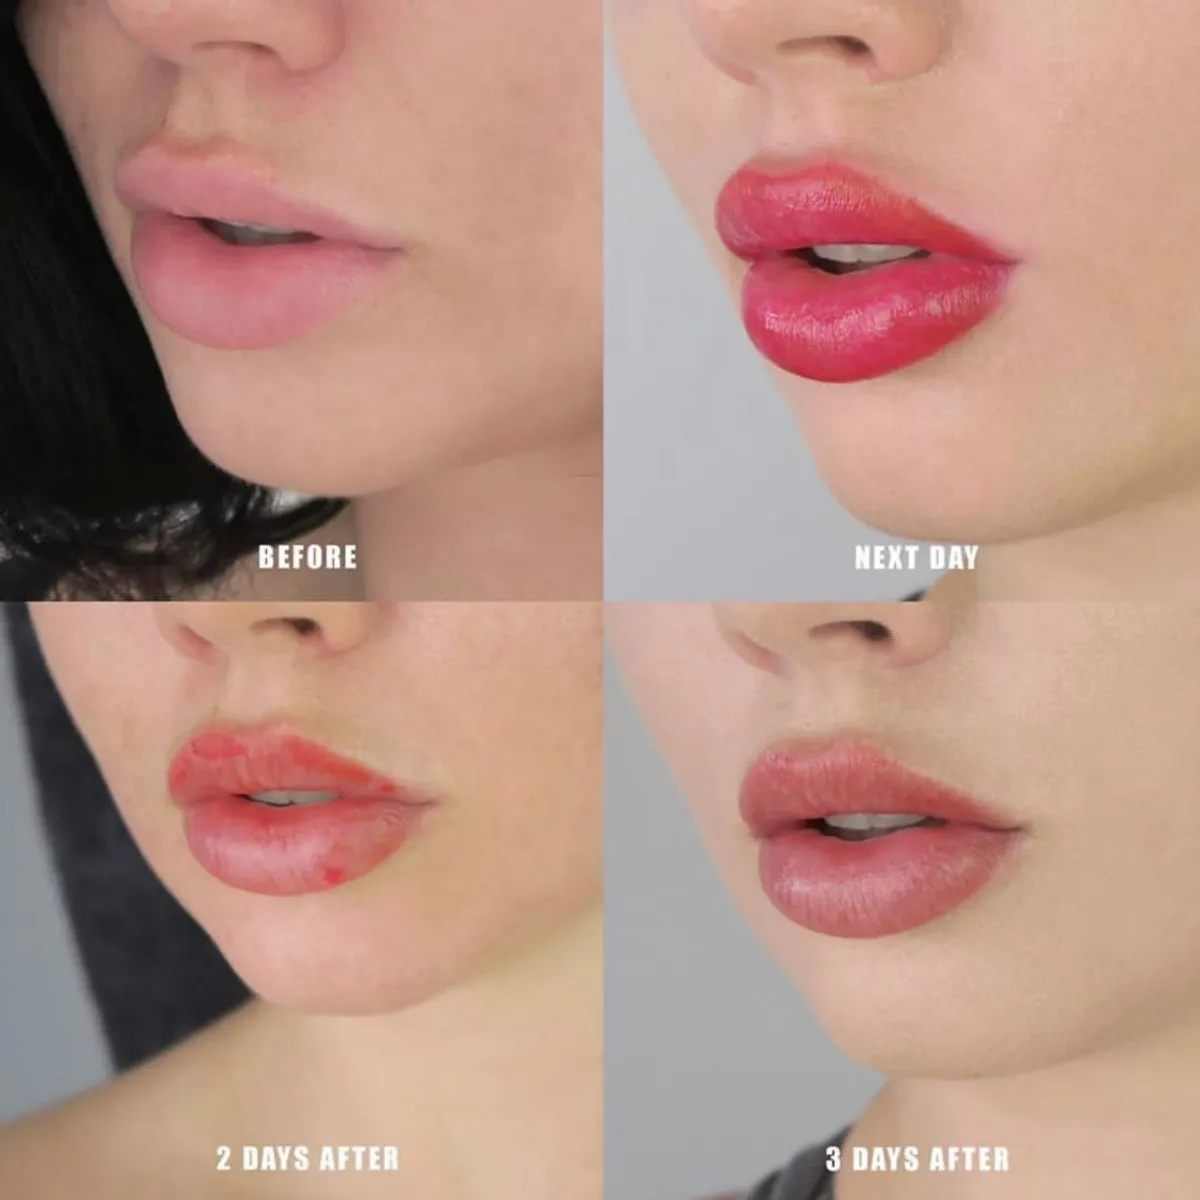 Lip Plumping Tips – How to Plump Your Lips Naturally